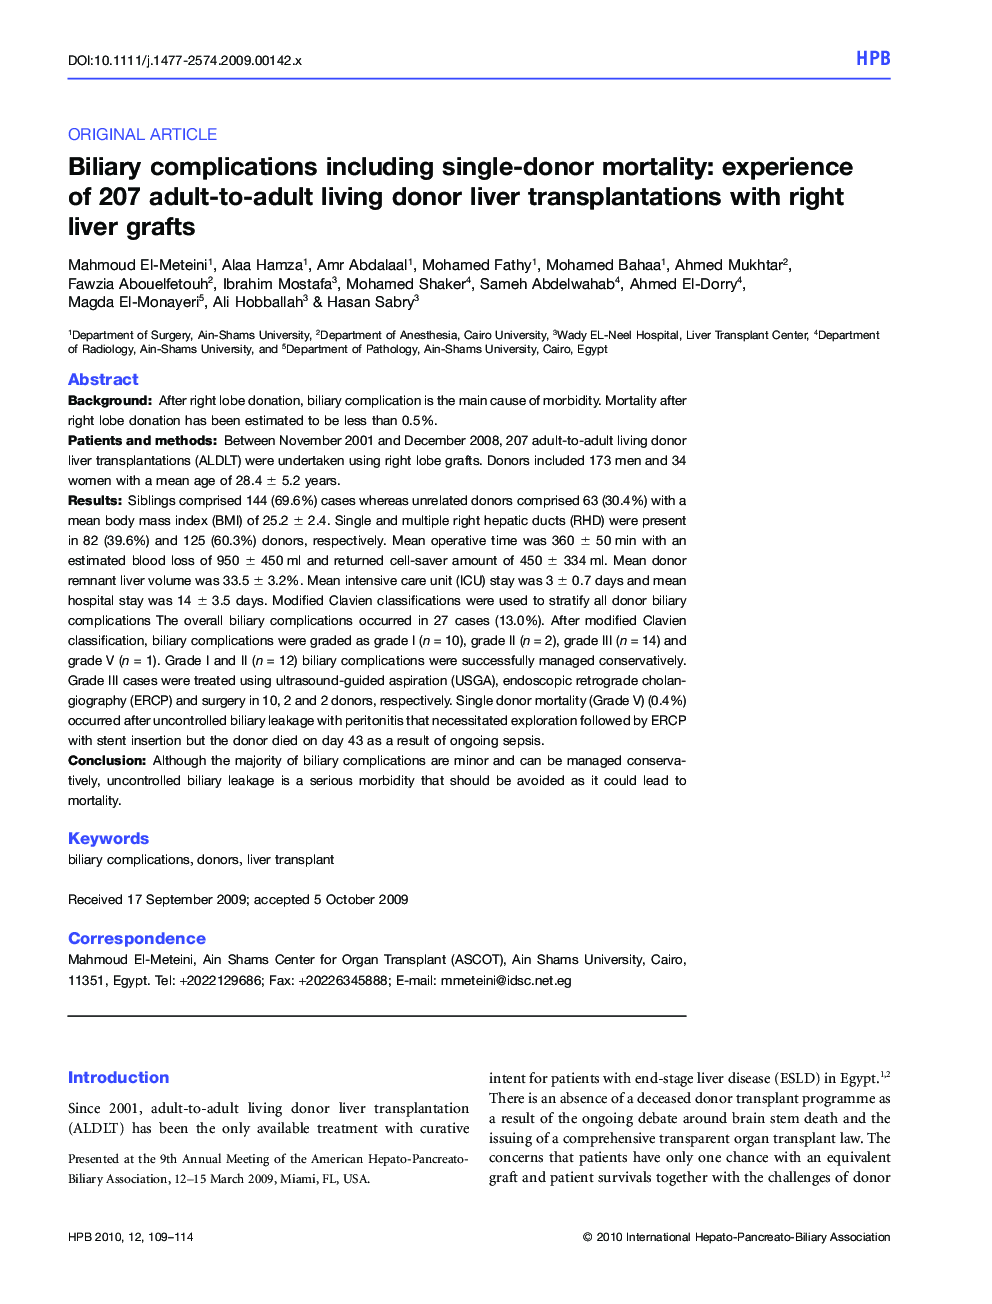 Biliary complications including single-donor mortality: experience of 207 adult-to-adult living donor liver transplantations with right liver grafts